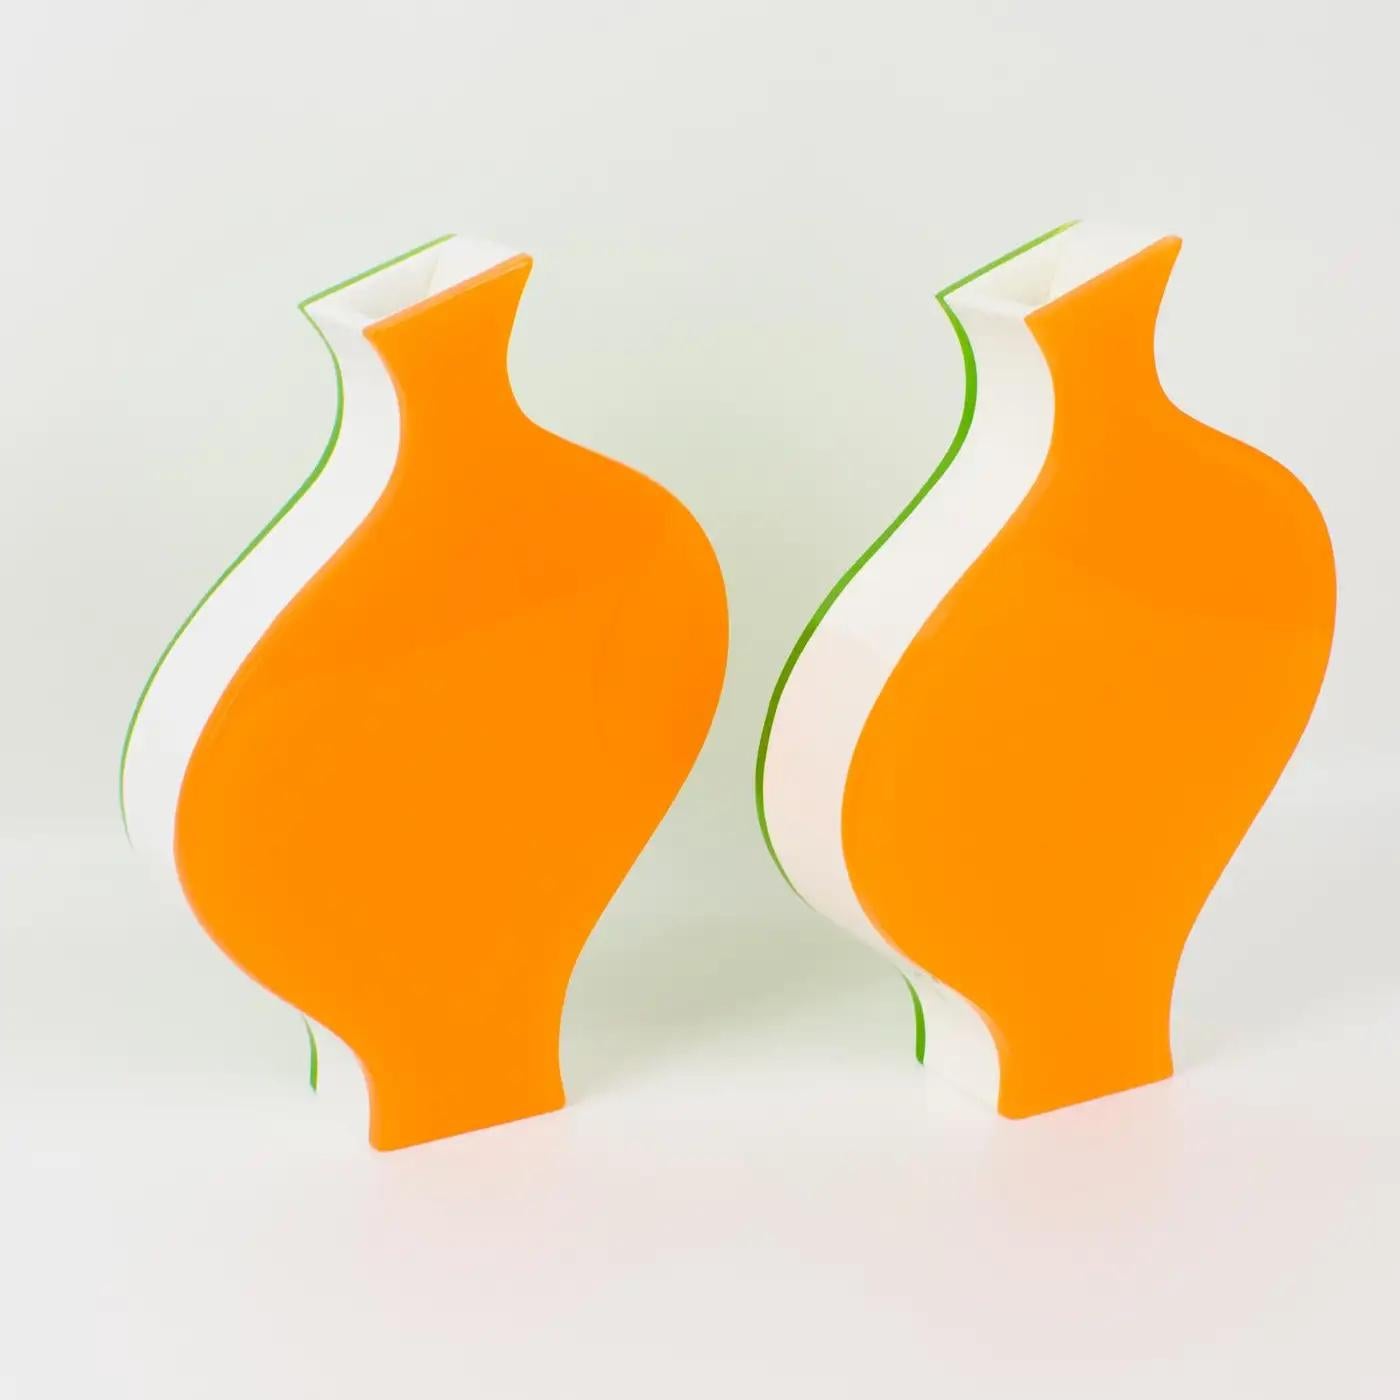 Acrylic Villeroy & Boch Orange and Green Lucite Vases, 1990s For Sale